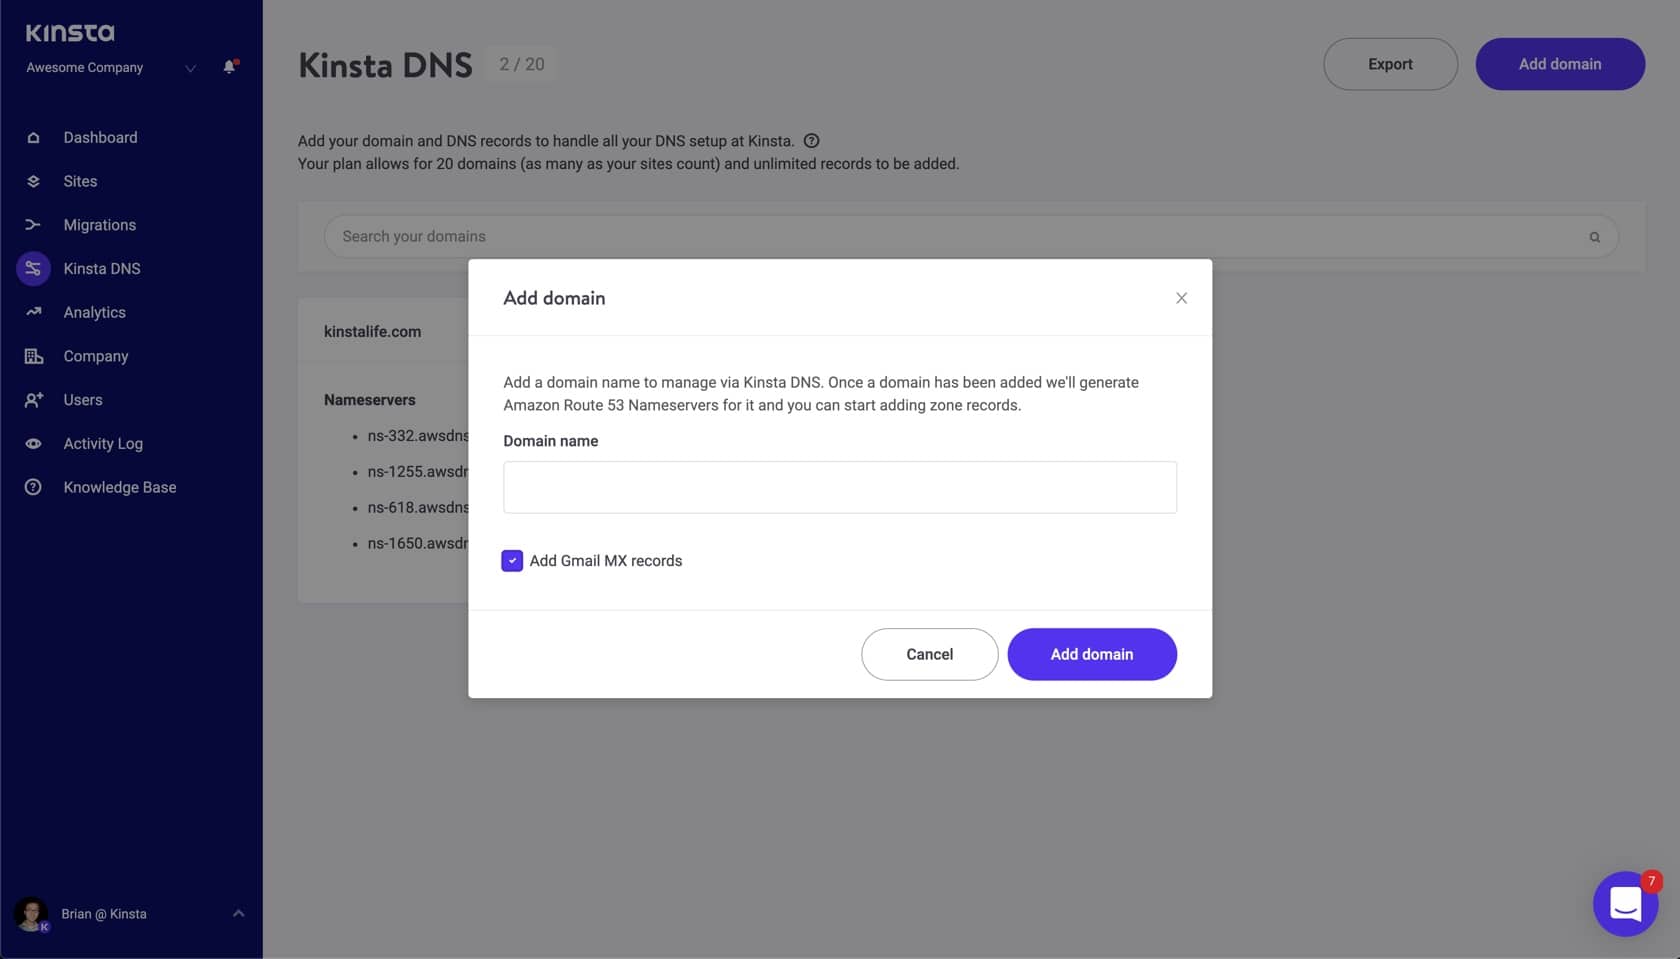 Automatically add Gmail MX records with Kinsta DNS.